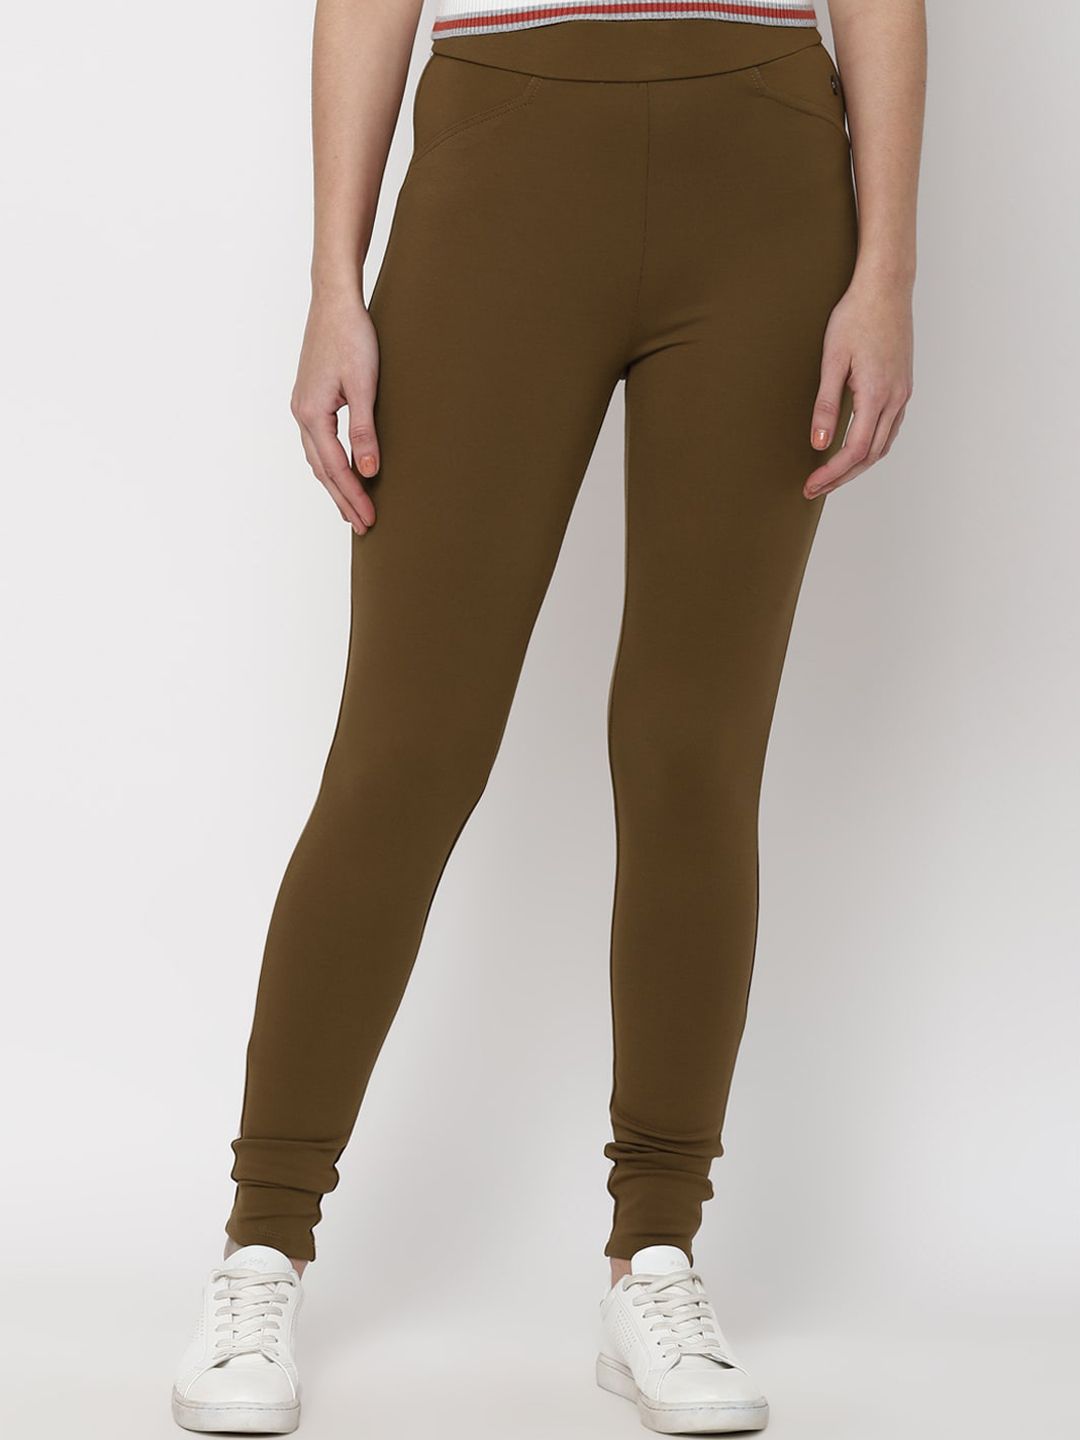 Allen Solly Woman Women Brown Joggers Trousers Price in India